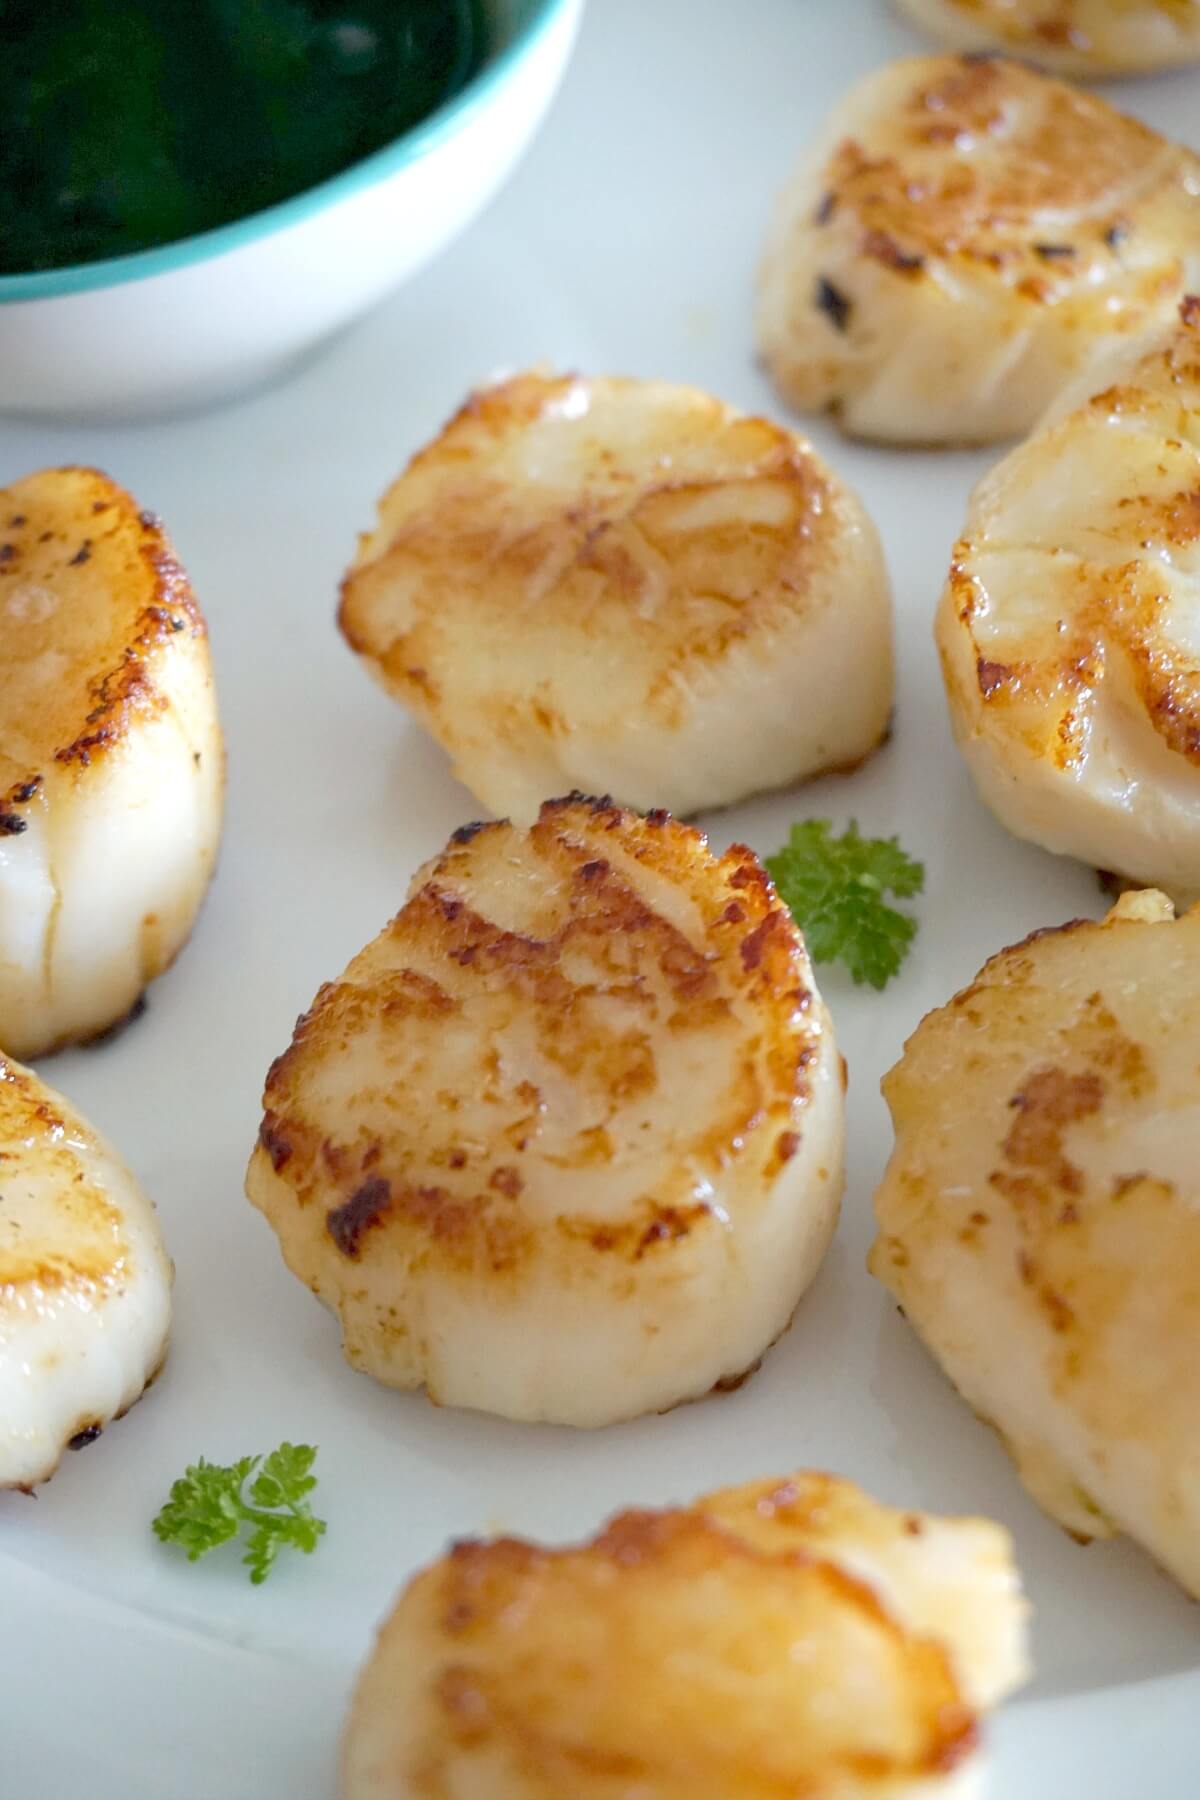 Scallops on a white plate.